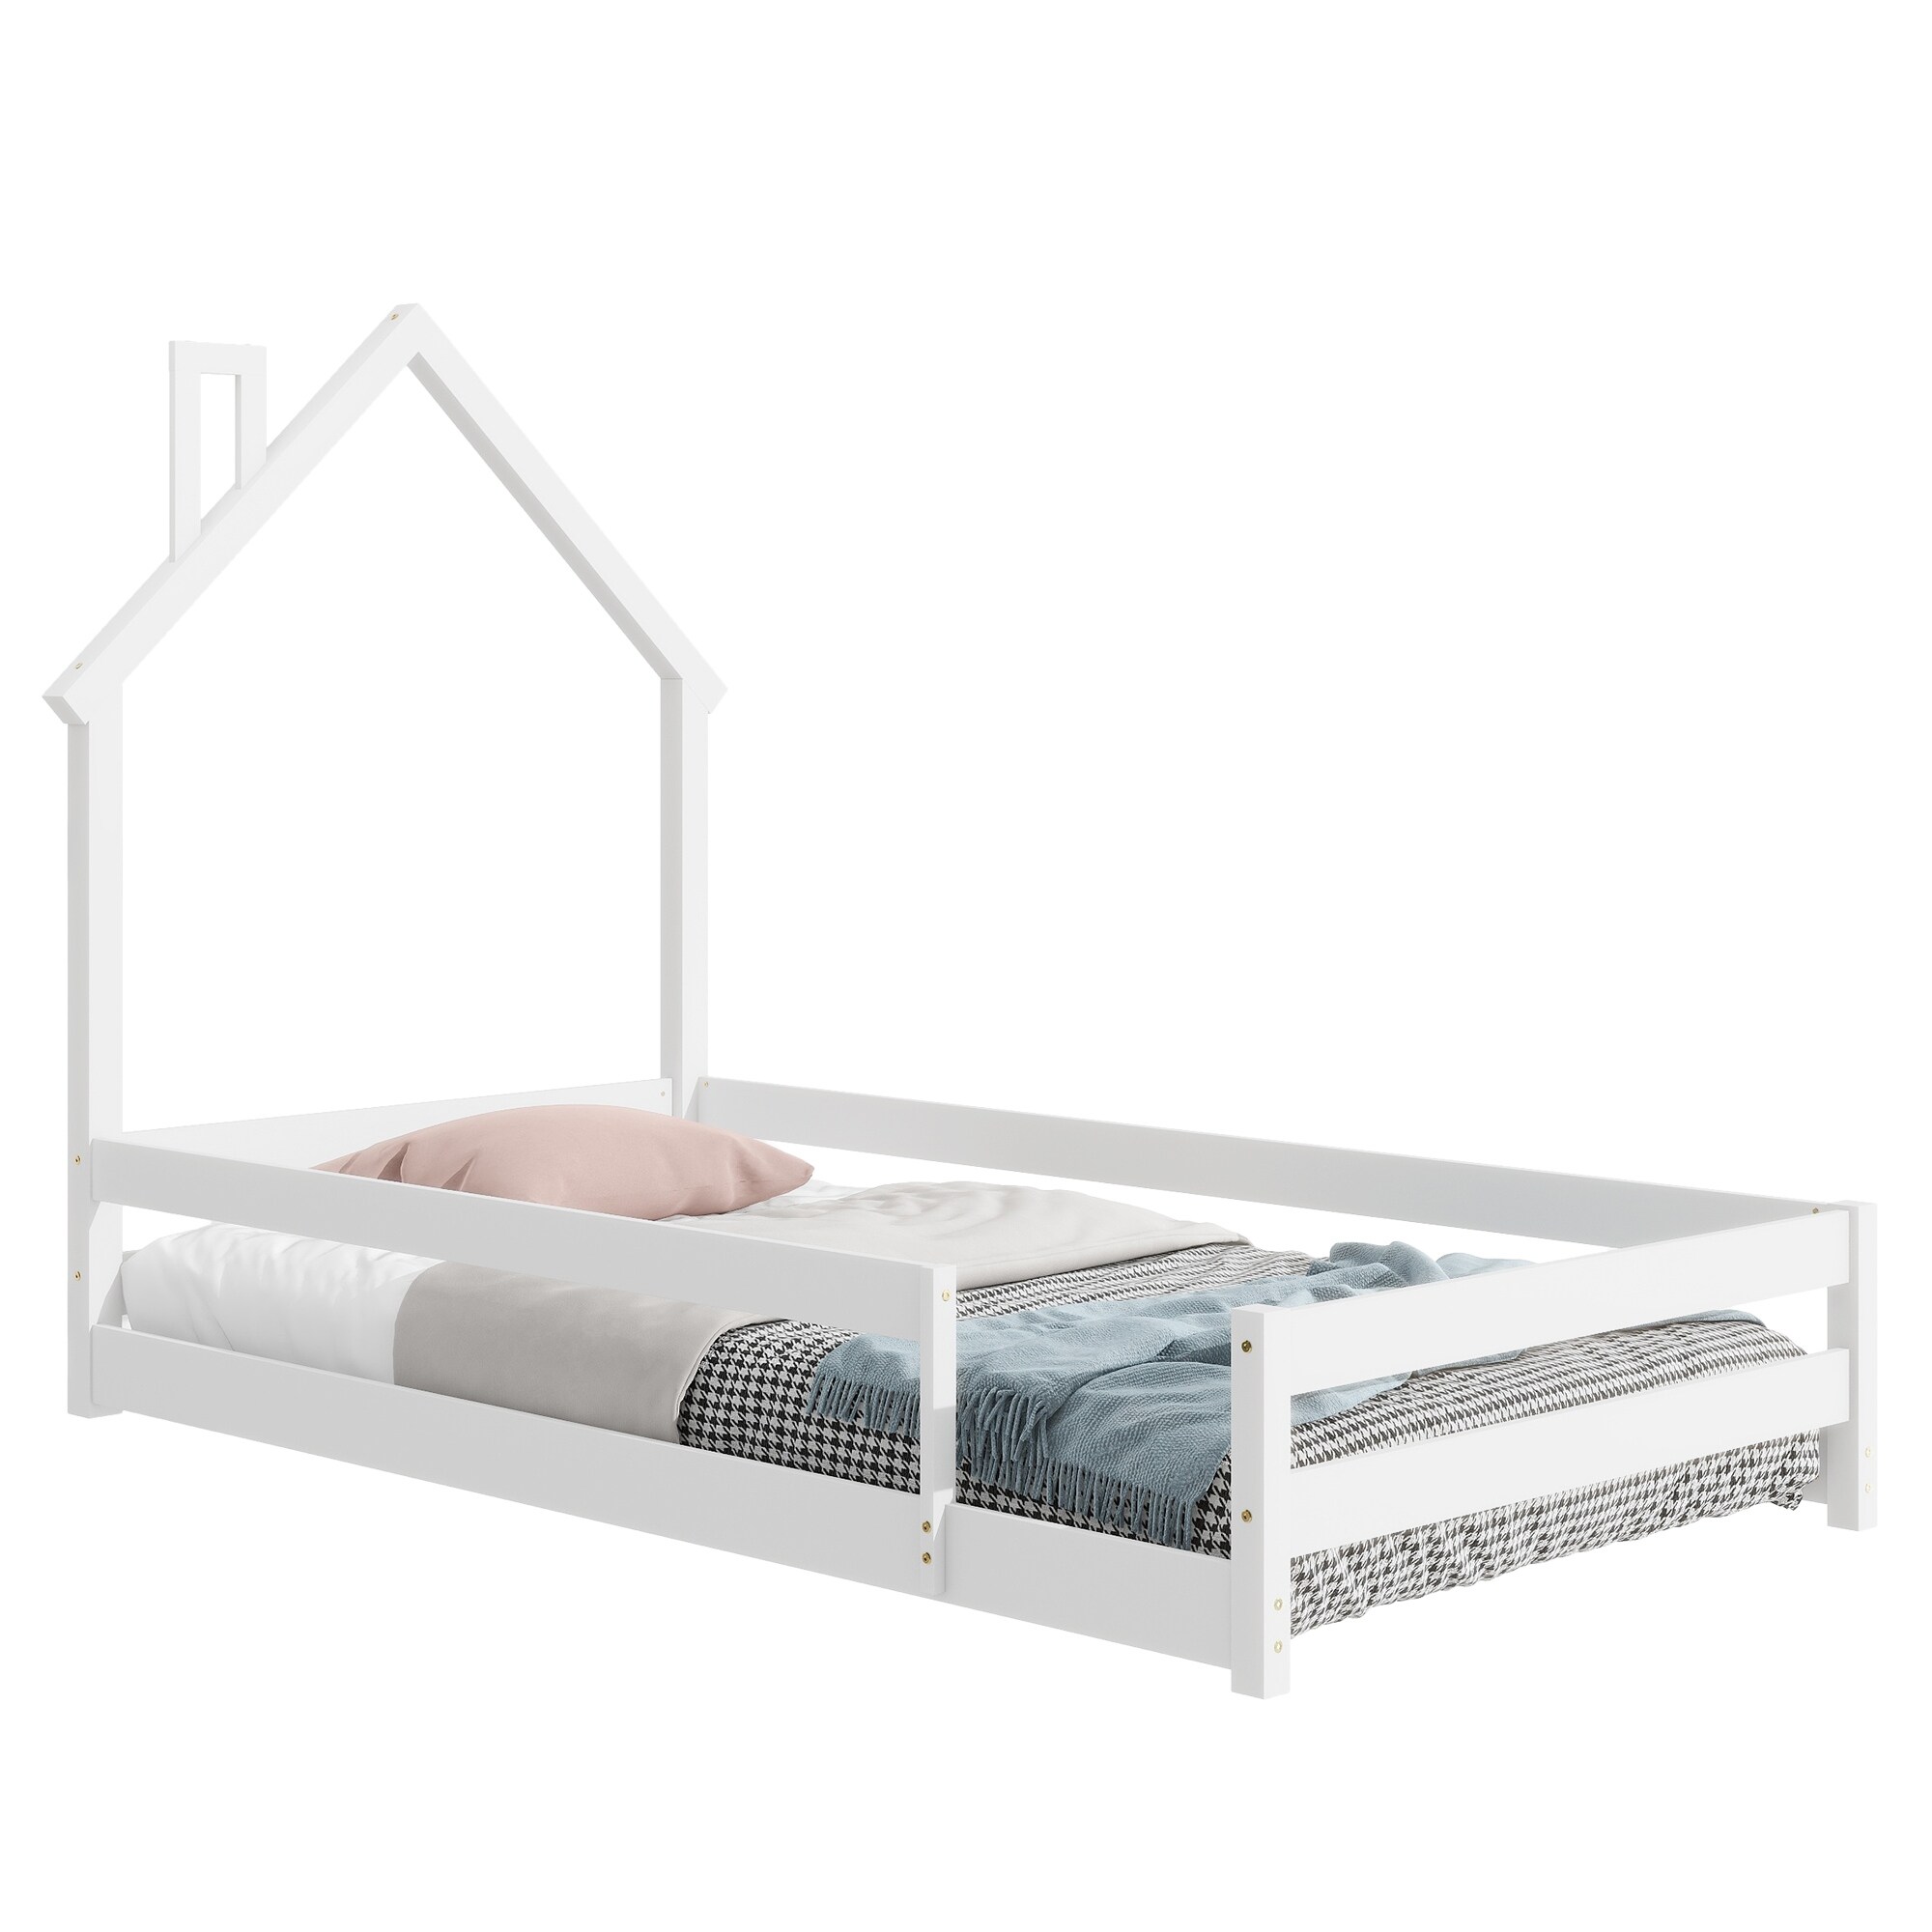 Twin Size Wood bed with House shaped Headboard Floor bed with Fences,White